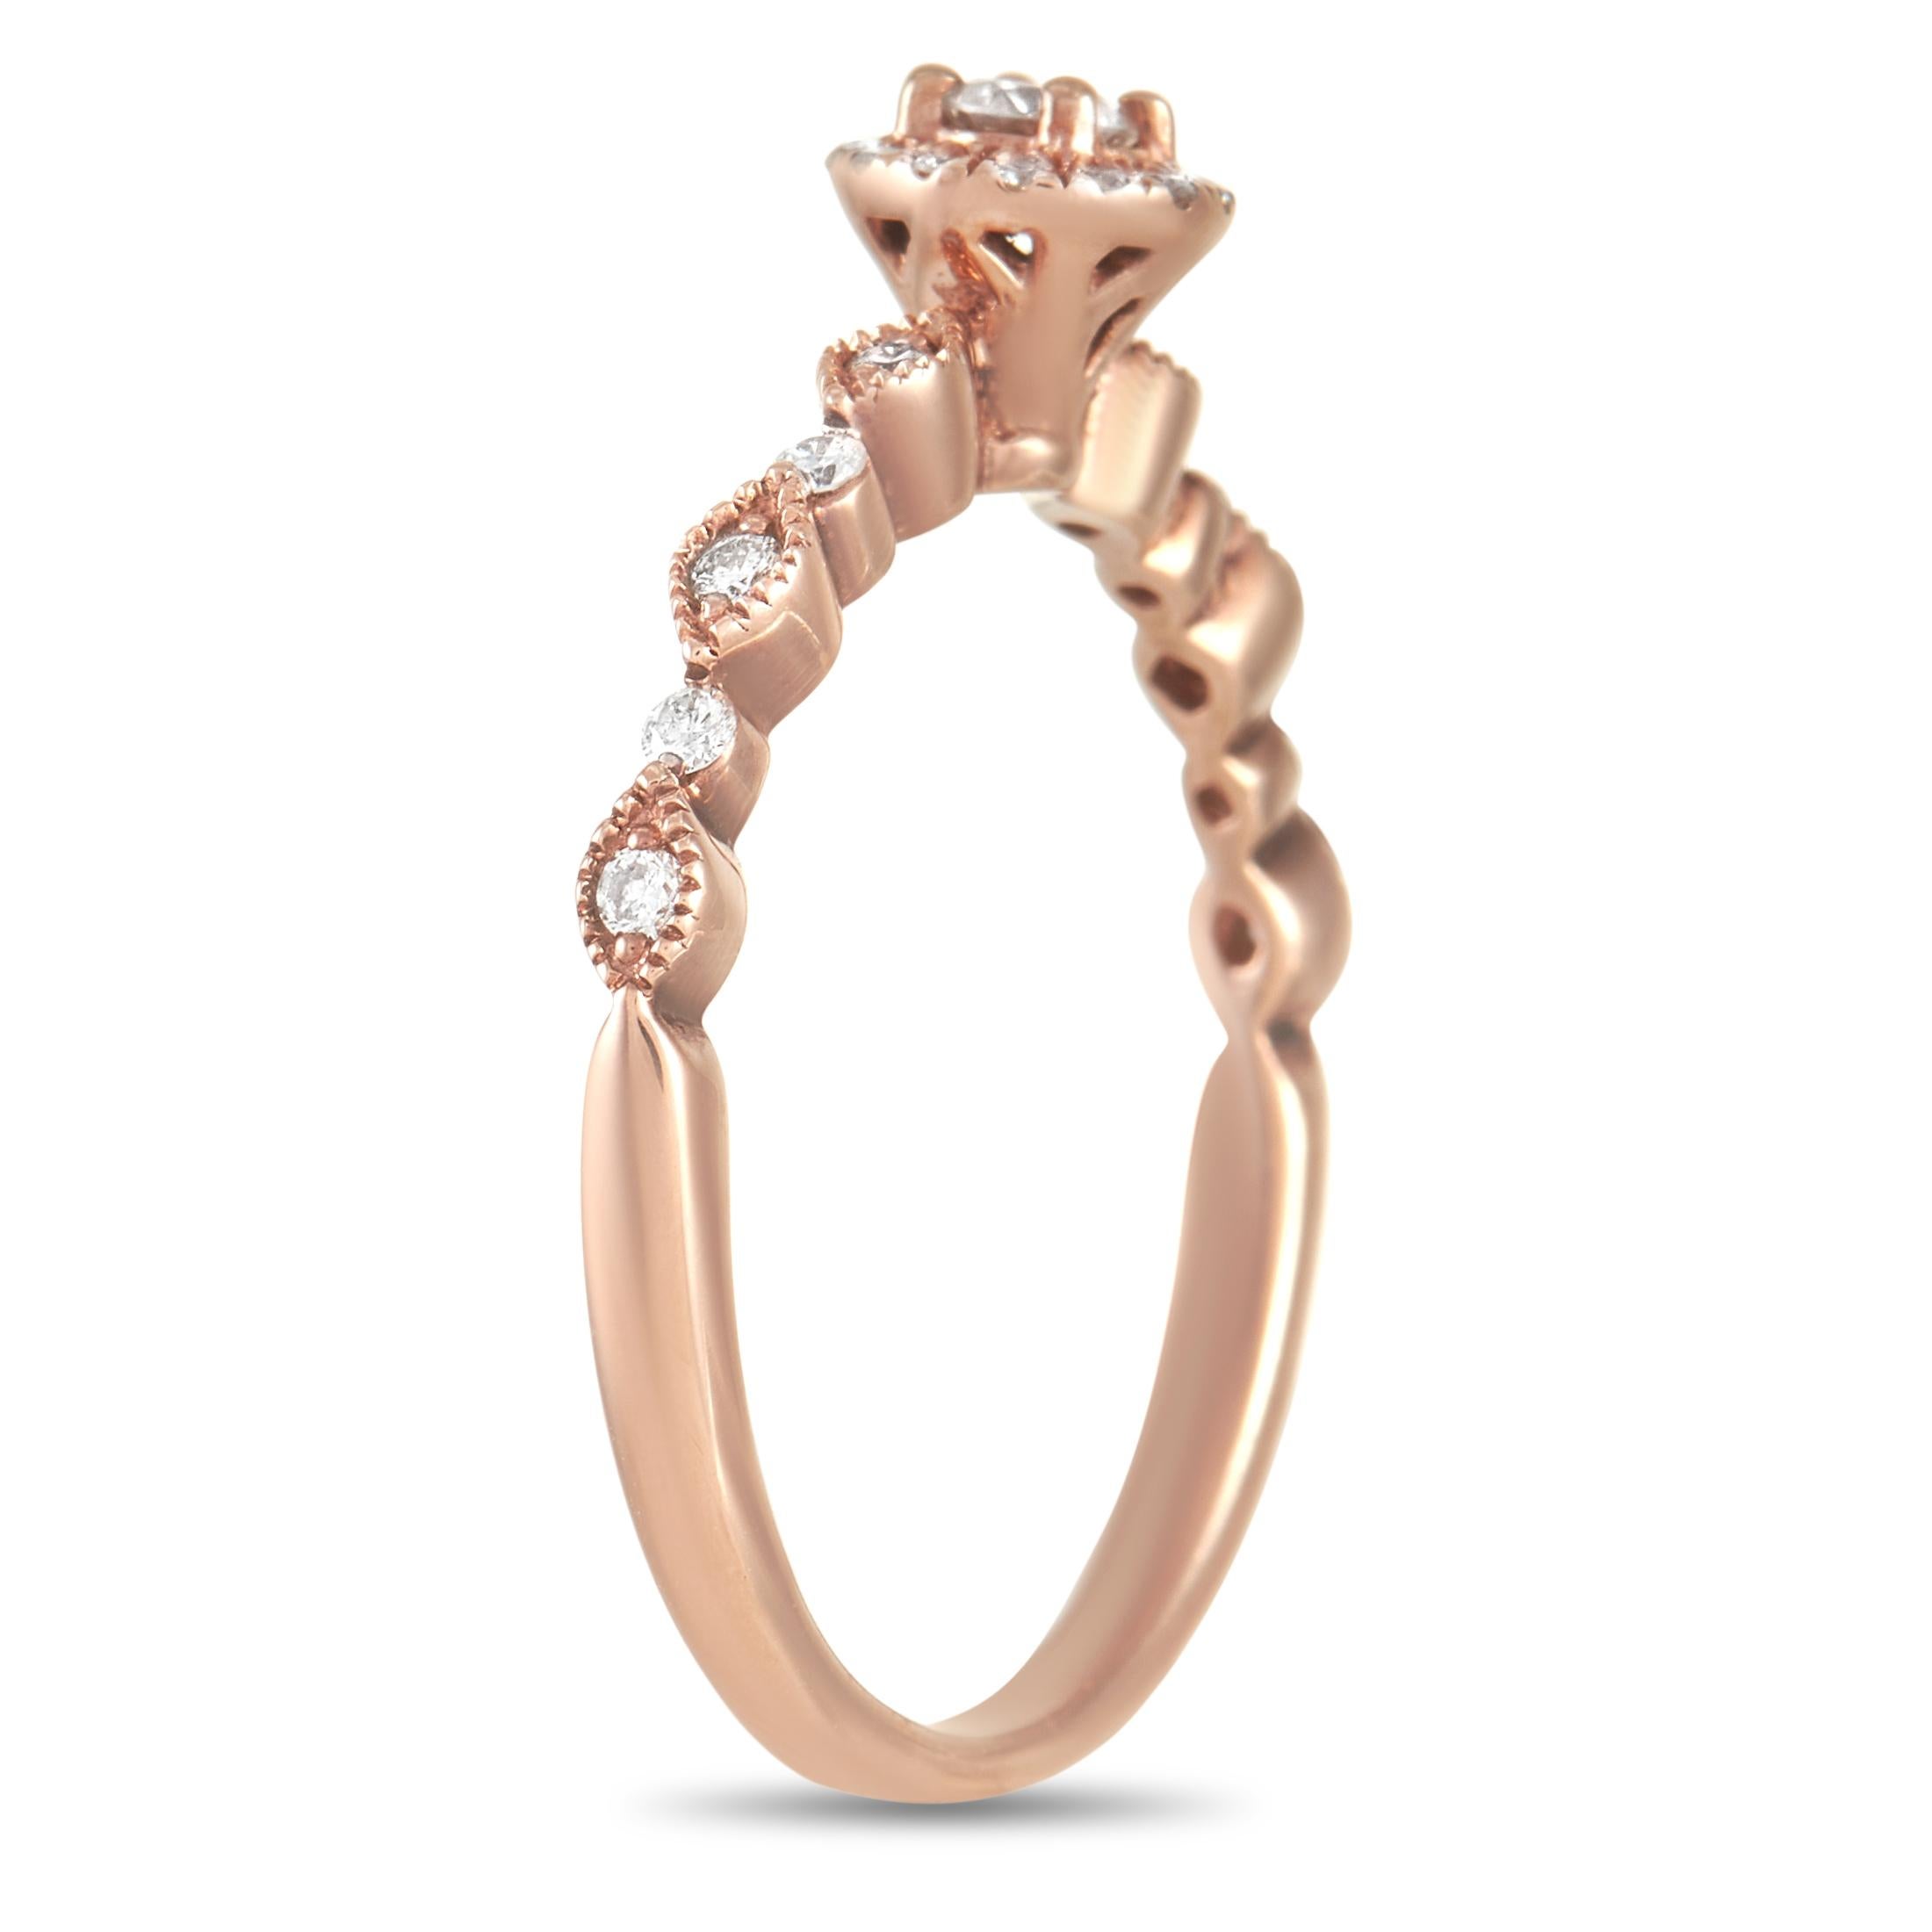 This gorgeous LB Exclusive 14K Rose Gold 0.25 ct Diamond Ring is made with 14K rose gold and set with a row of round-cut diamonds on either side of a round cut diamond center stone which is accented with a halo of smaller round-cut diamonds for a